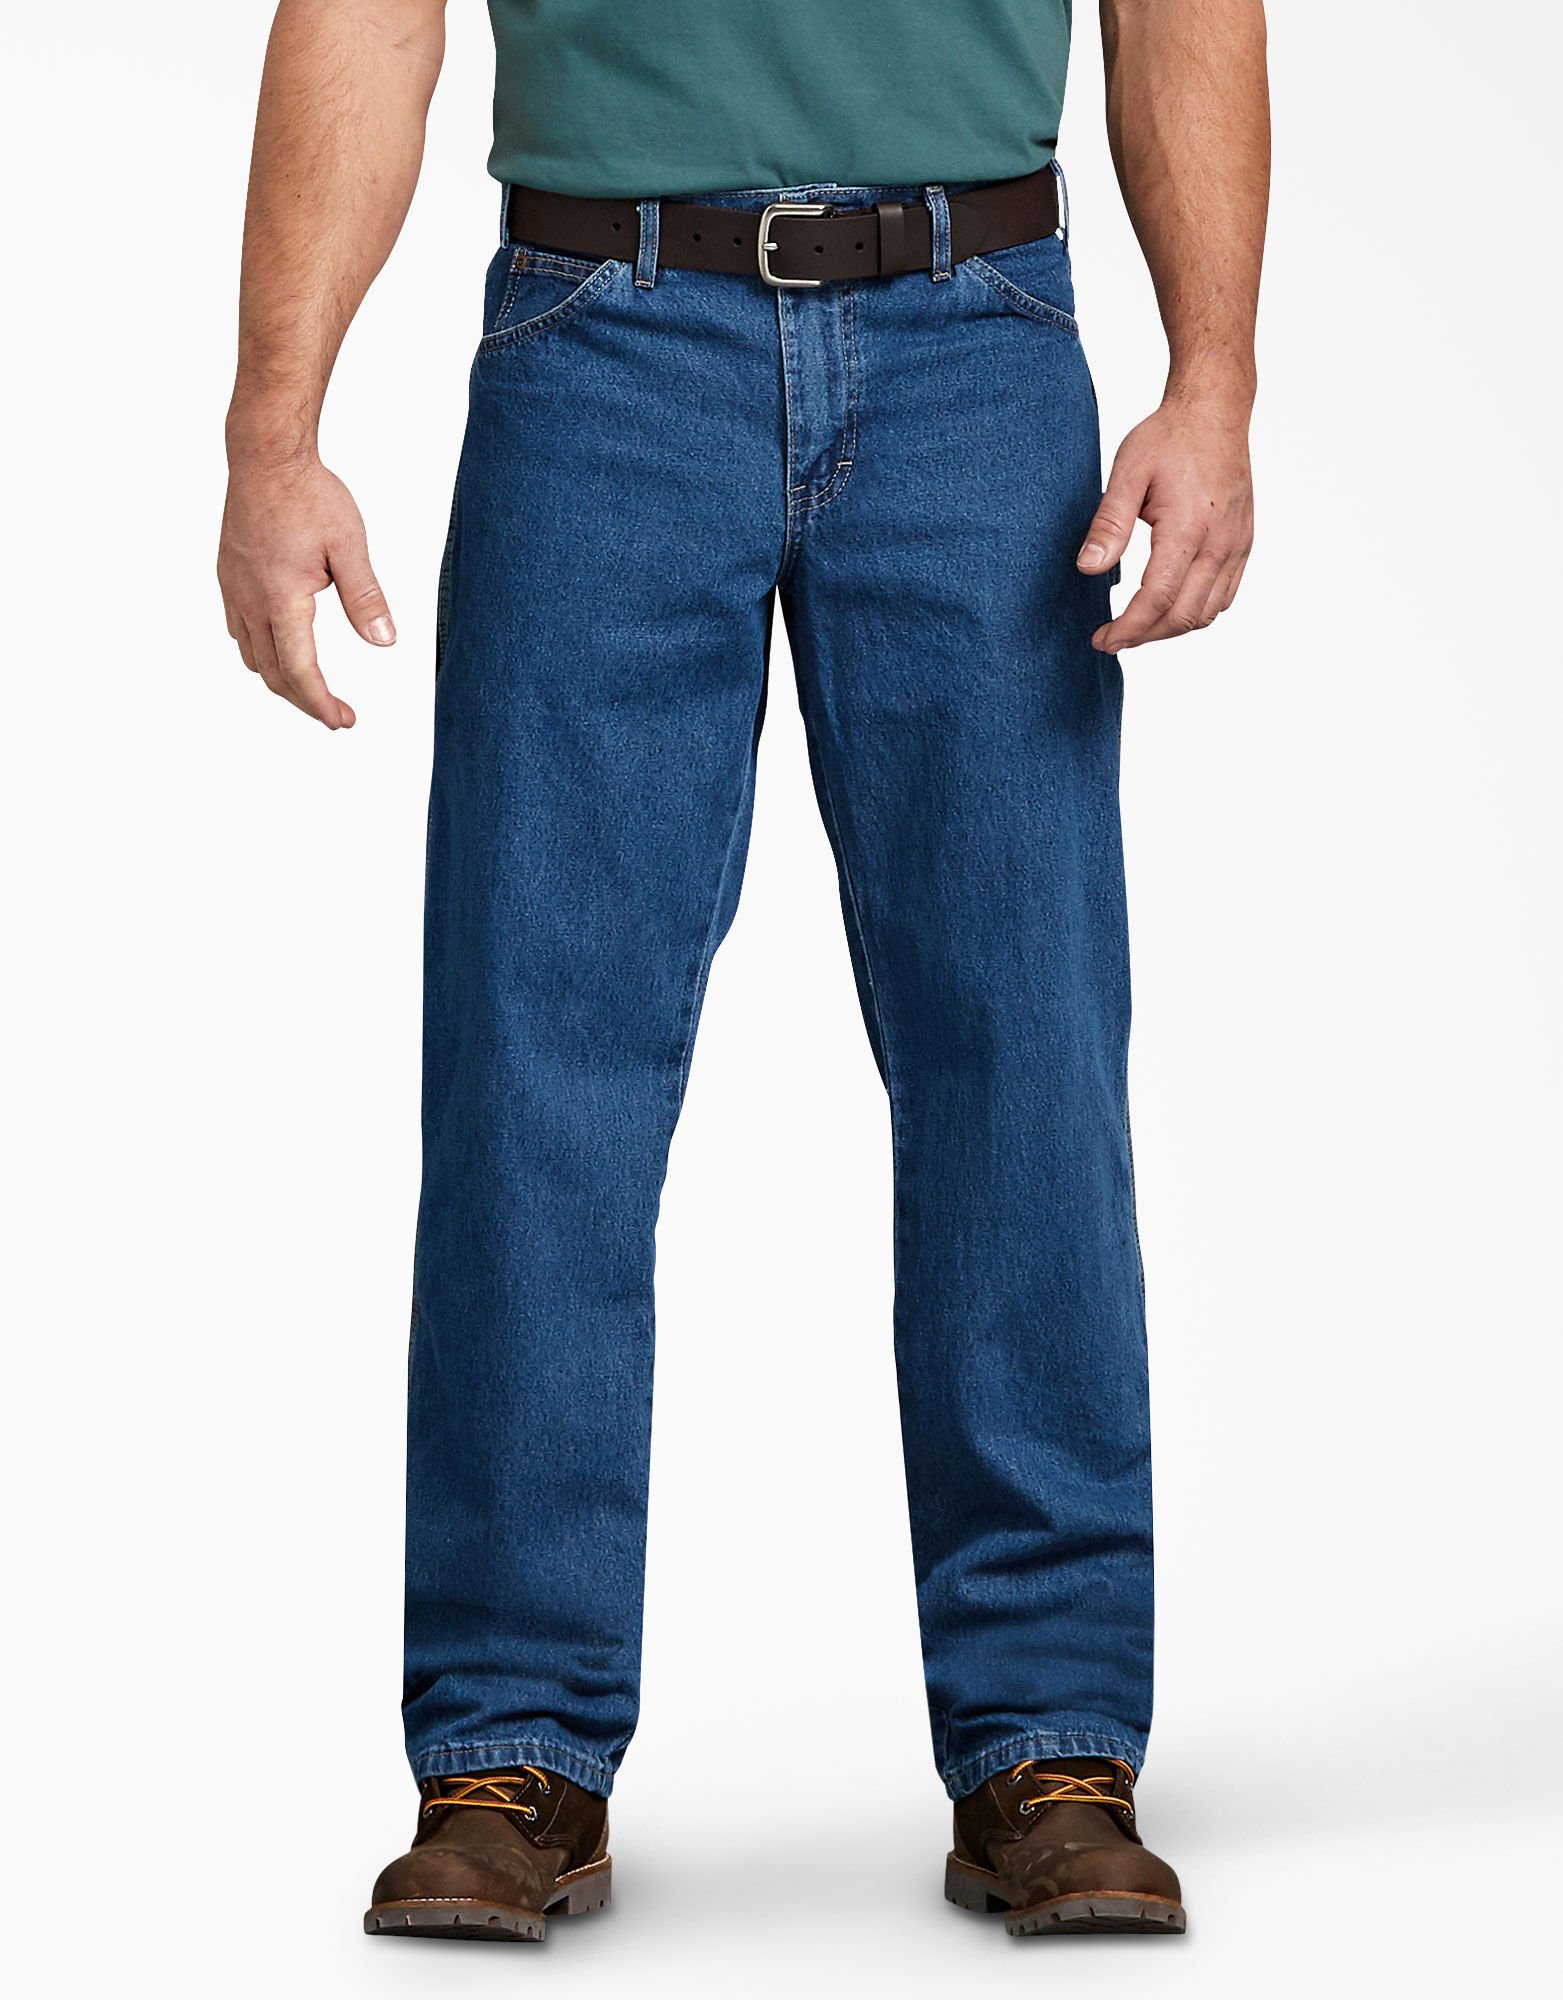 Relaxed Fit Carpenter Denim Jeans